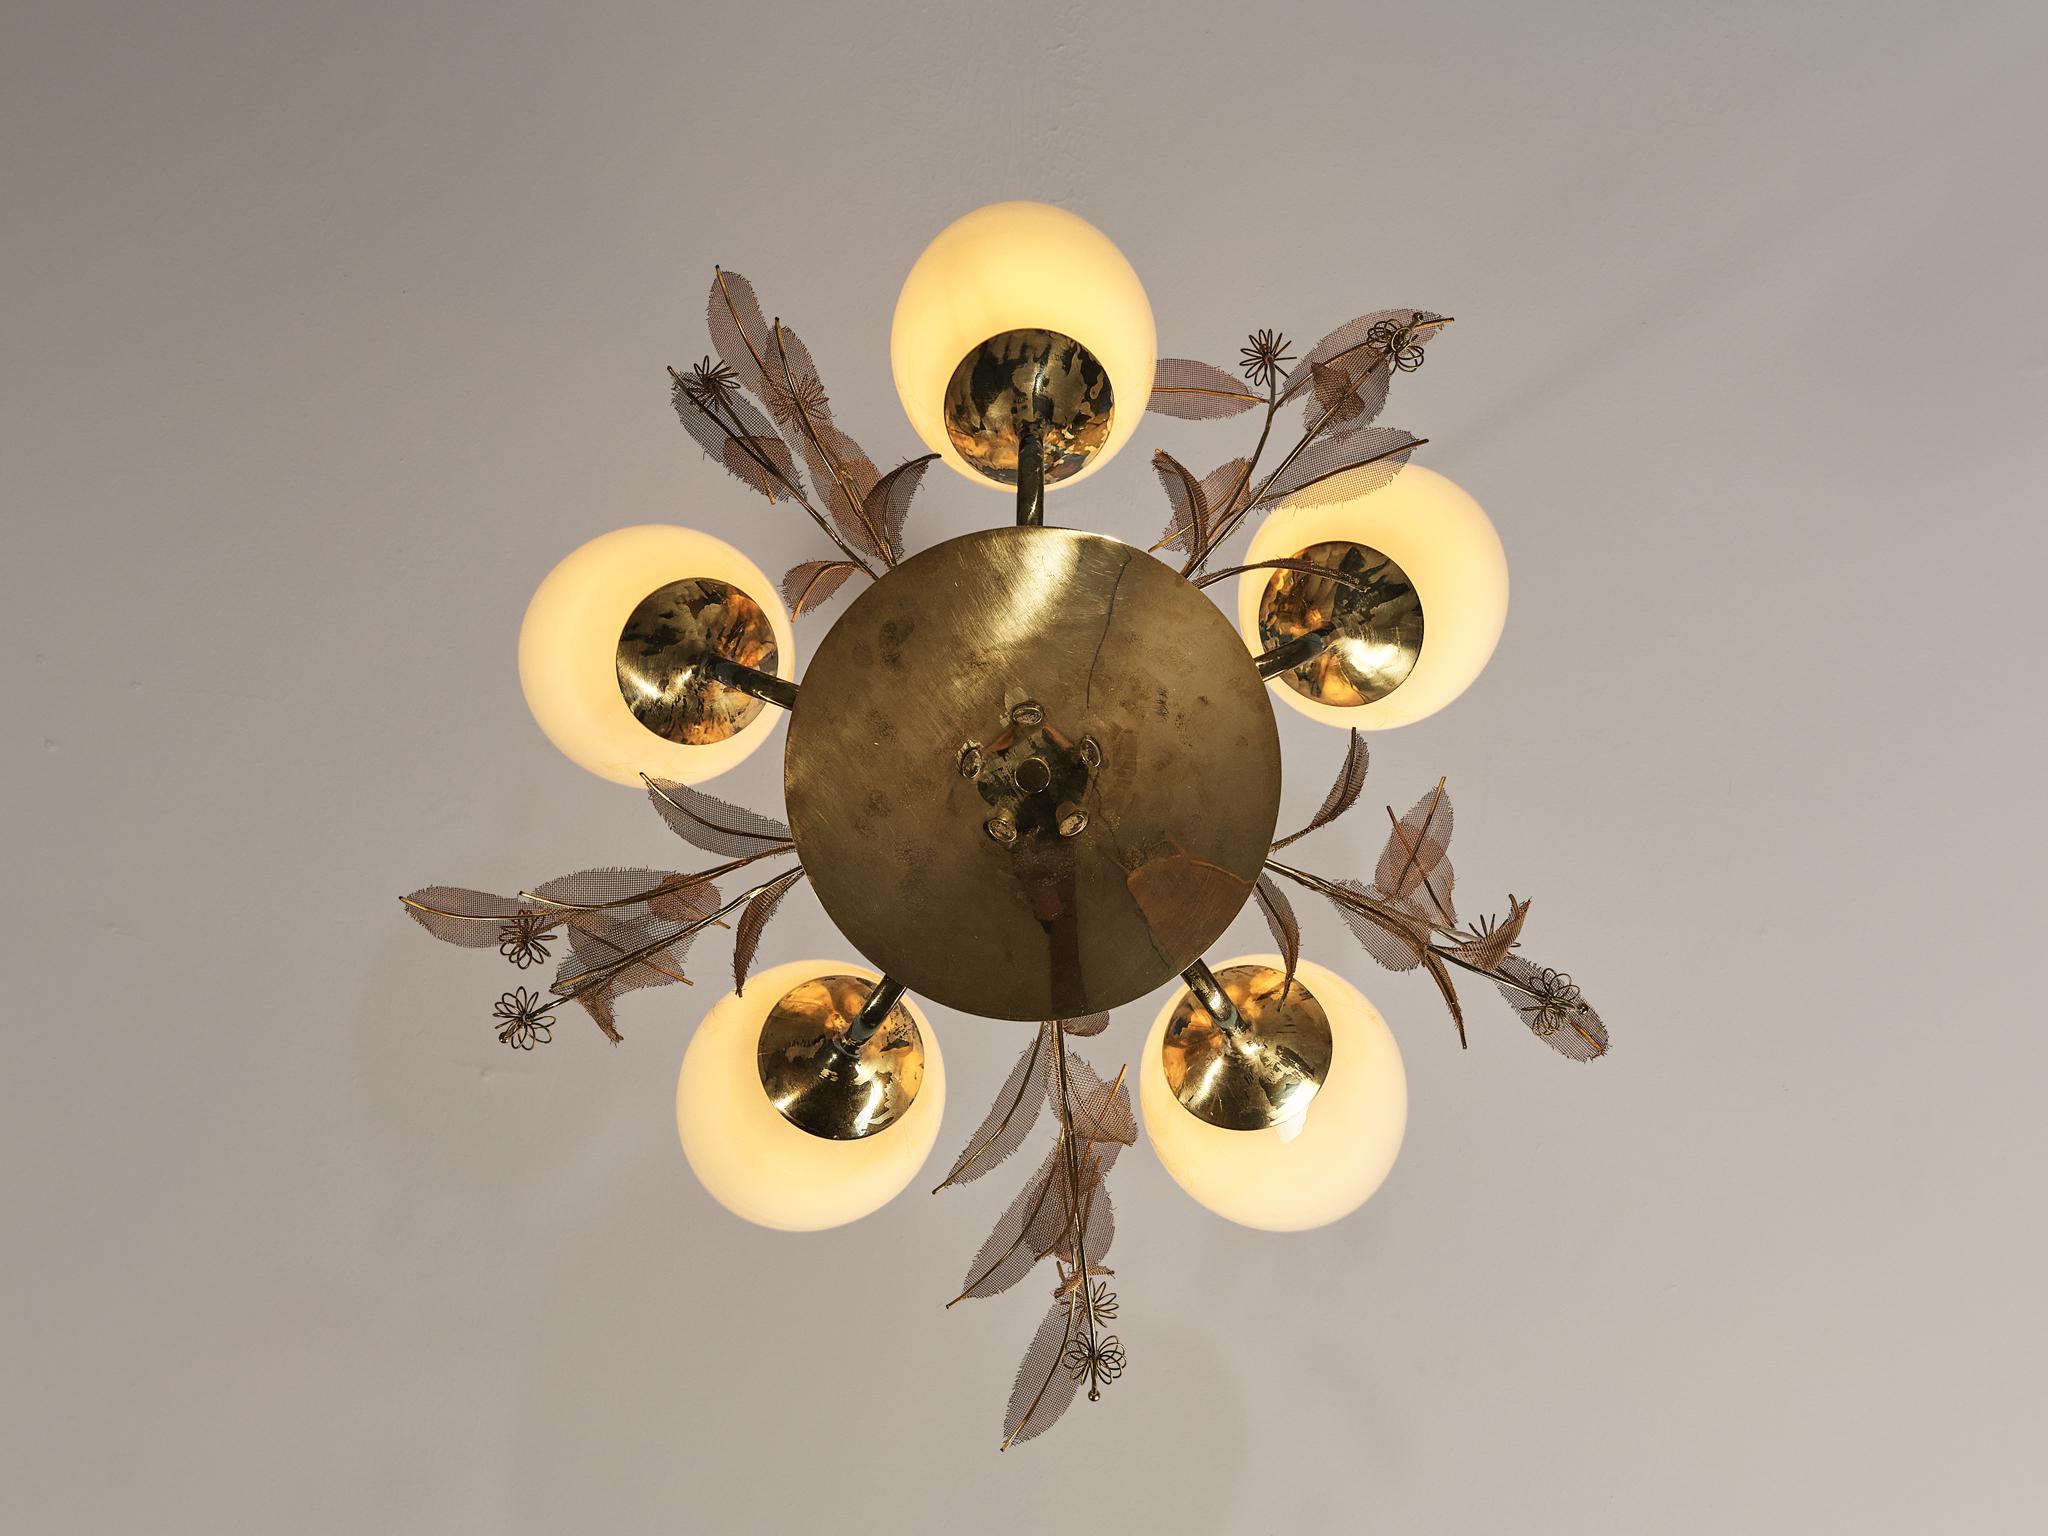 Scandinavian Modern Paavo Tynell for Taito Oy 'Concerto' Chandelier in Brass and Beige Glass 